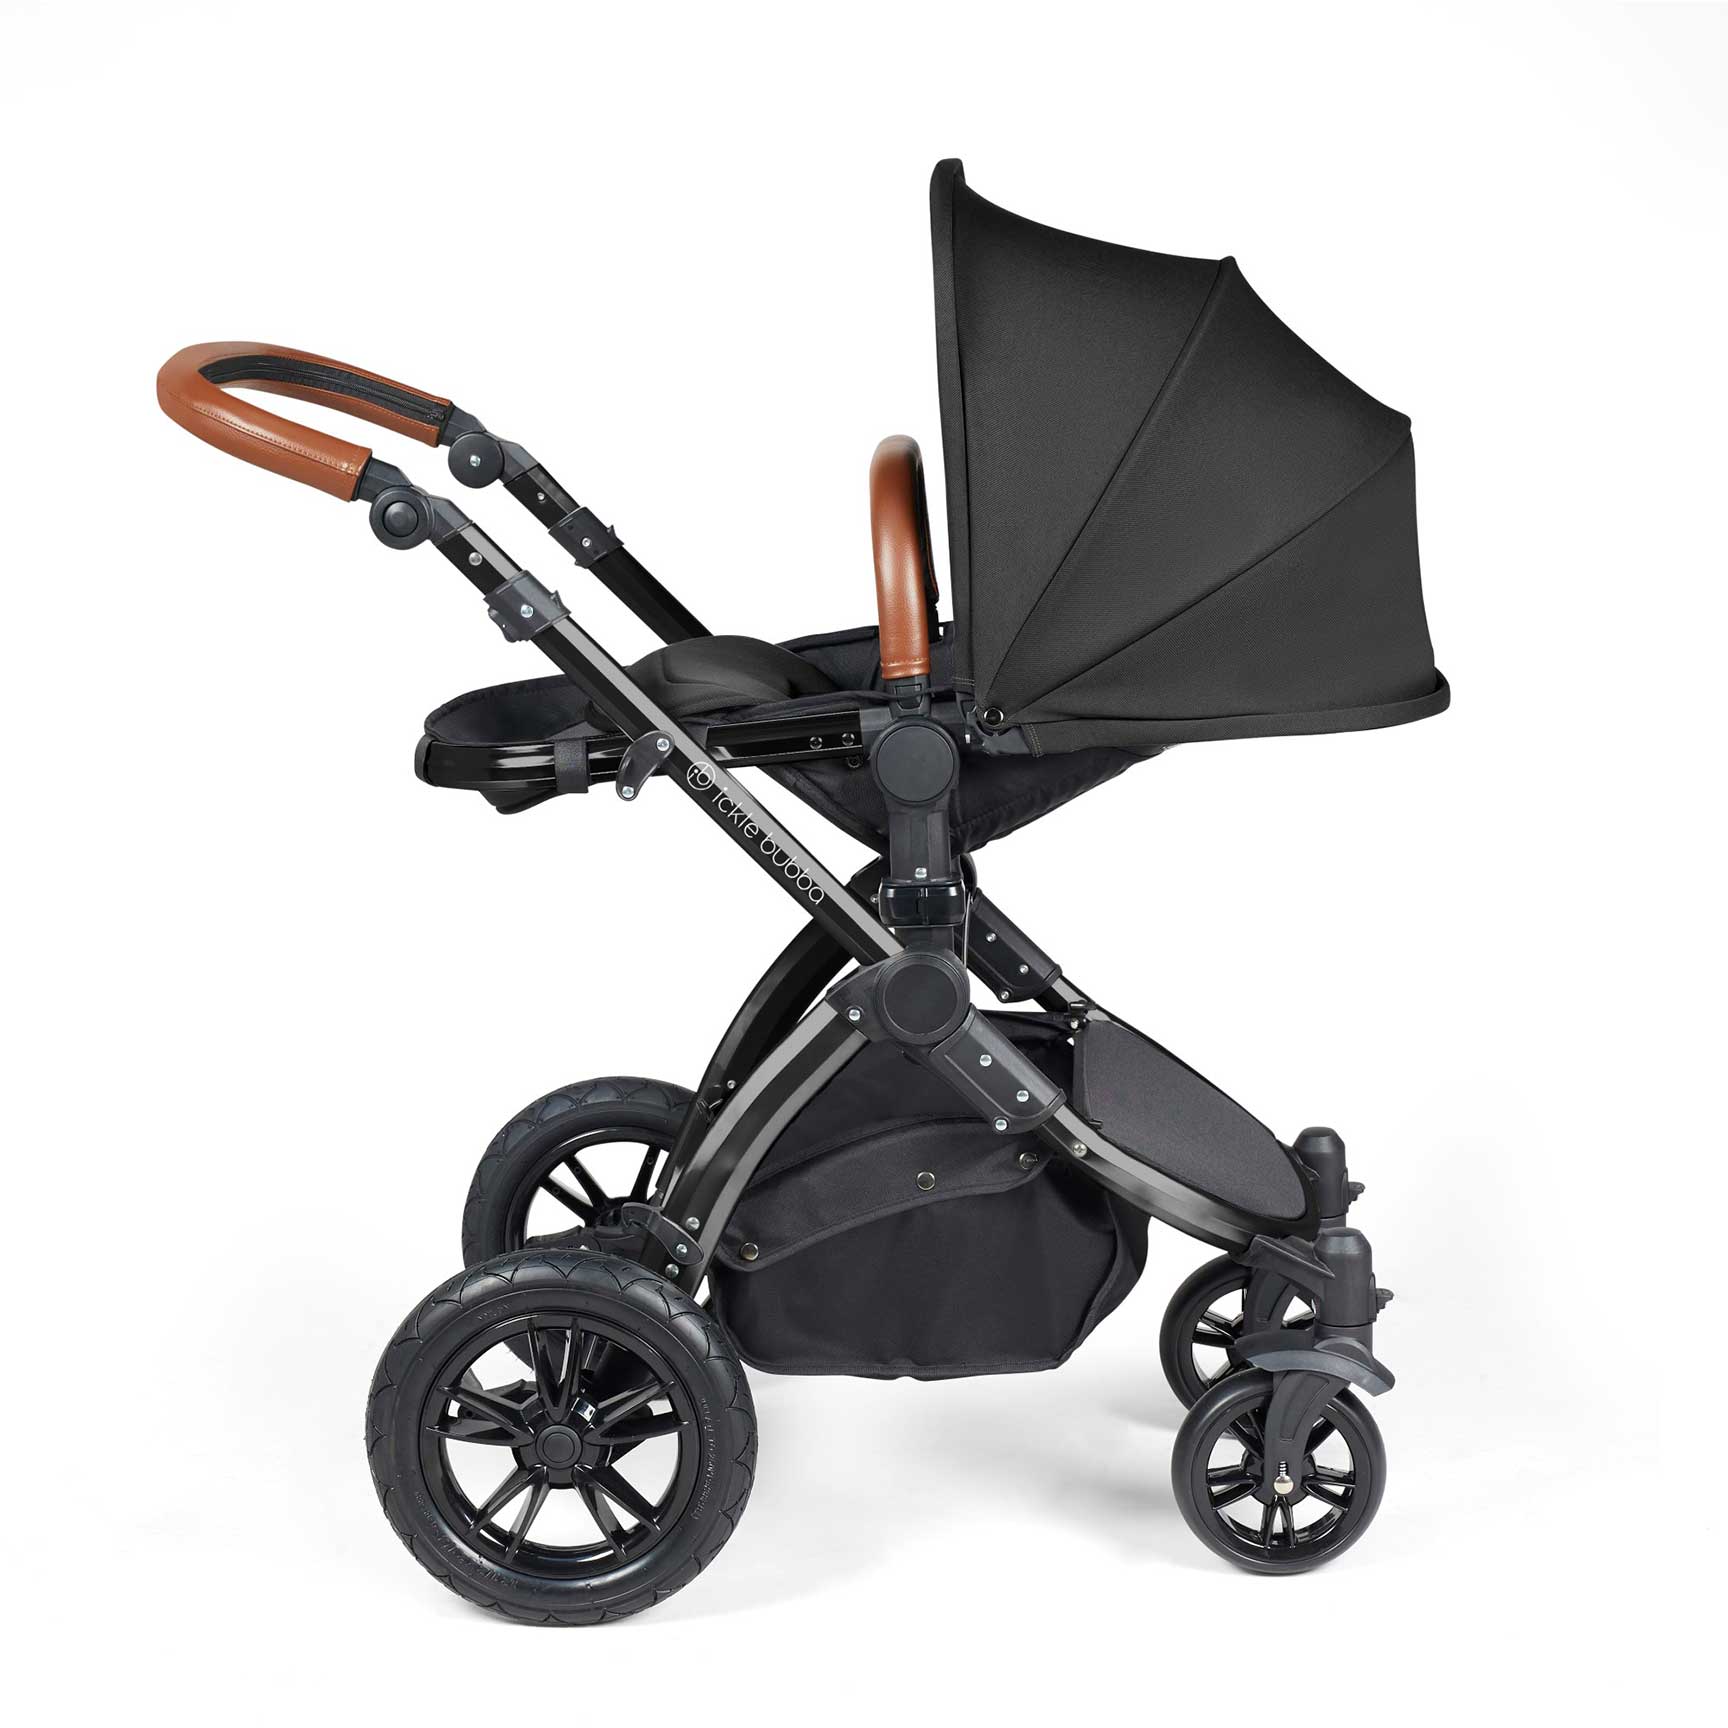 Ickle Bubba Stomp Luxe 2-in-1 Plus Pushchair & Carrycot in Black/Midnight/Tan Travel Systems 10-003-001-203 5056515026184